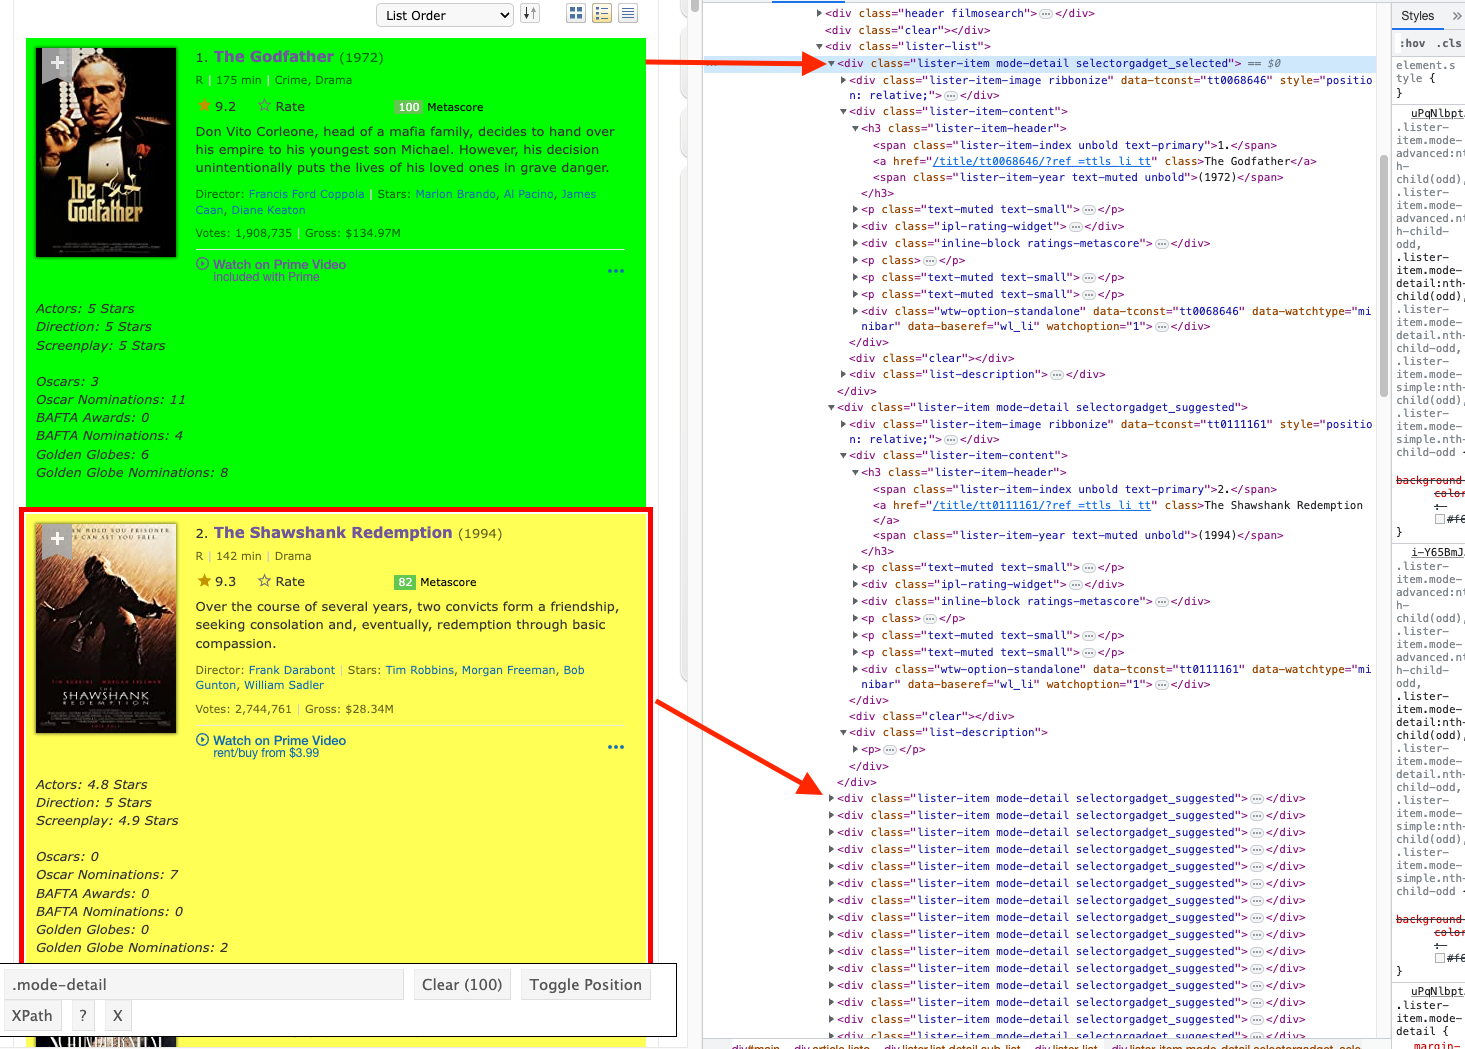 Snapshot of the web site showing all of 'The Godfather' highlighted in green and all of 'The Shawshank Redemption' highlighted in yellow with the code tools open and the selector `mode-detail` with 100 elements selected.